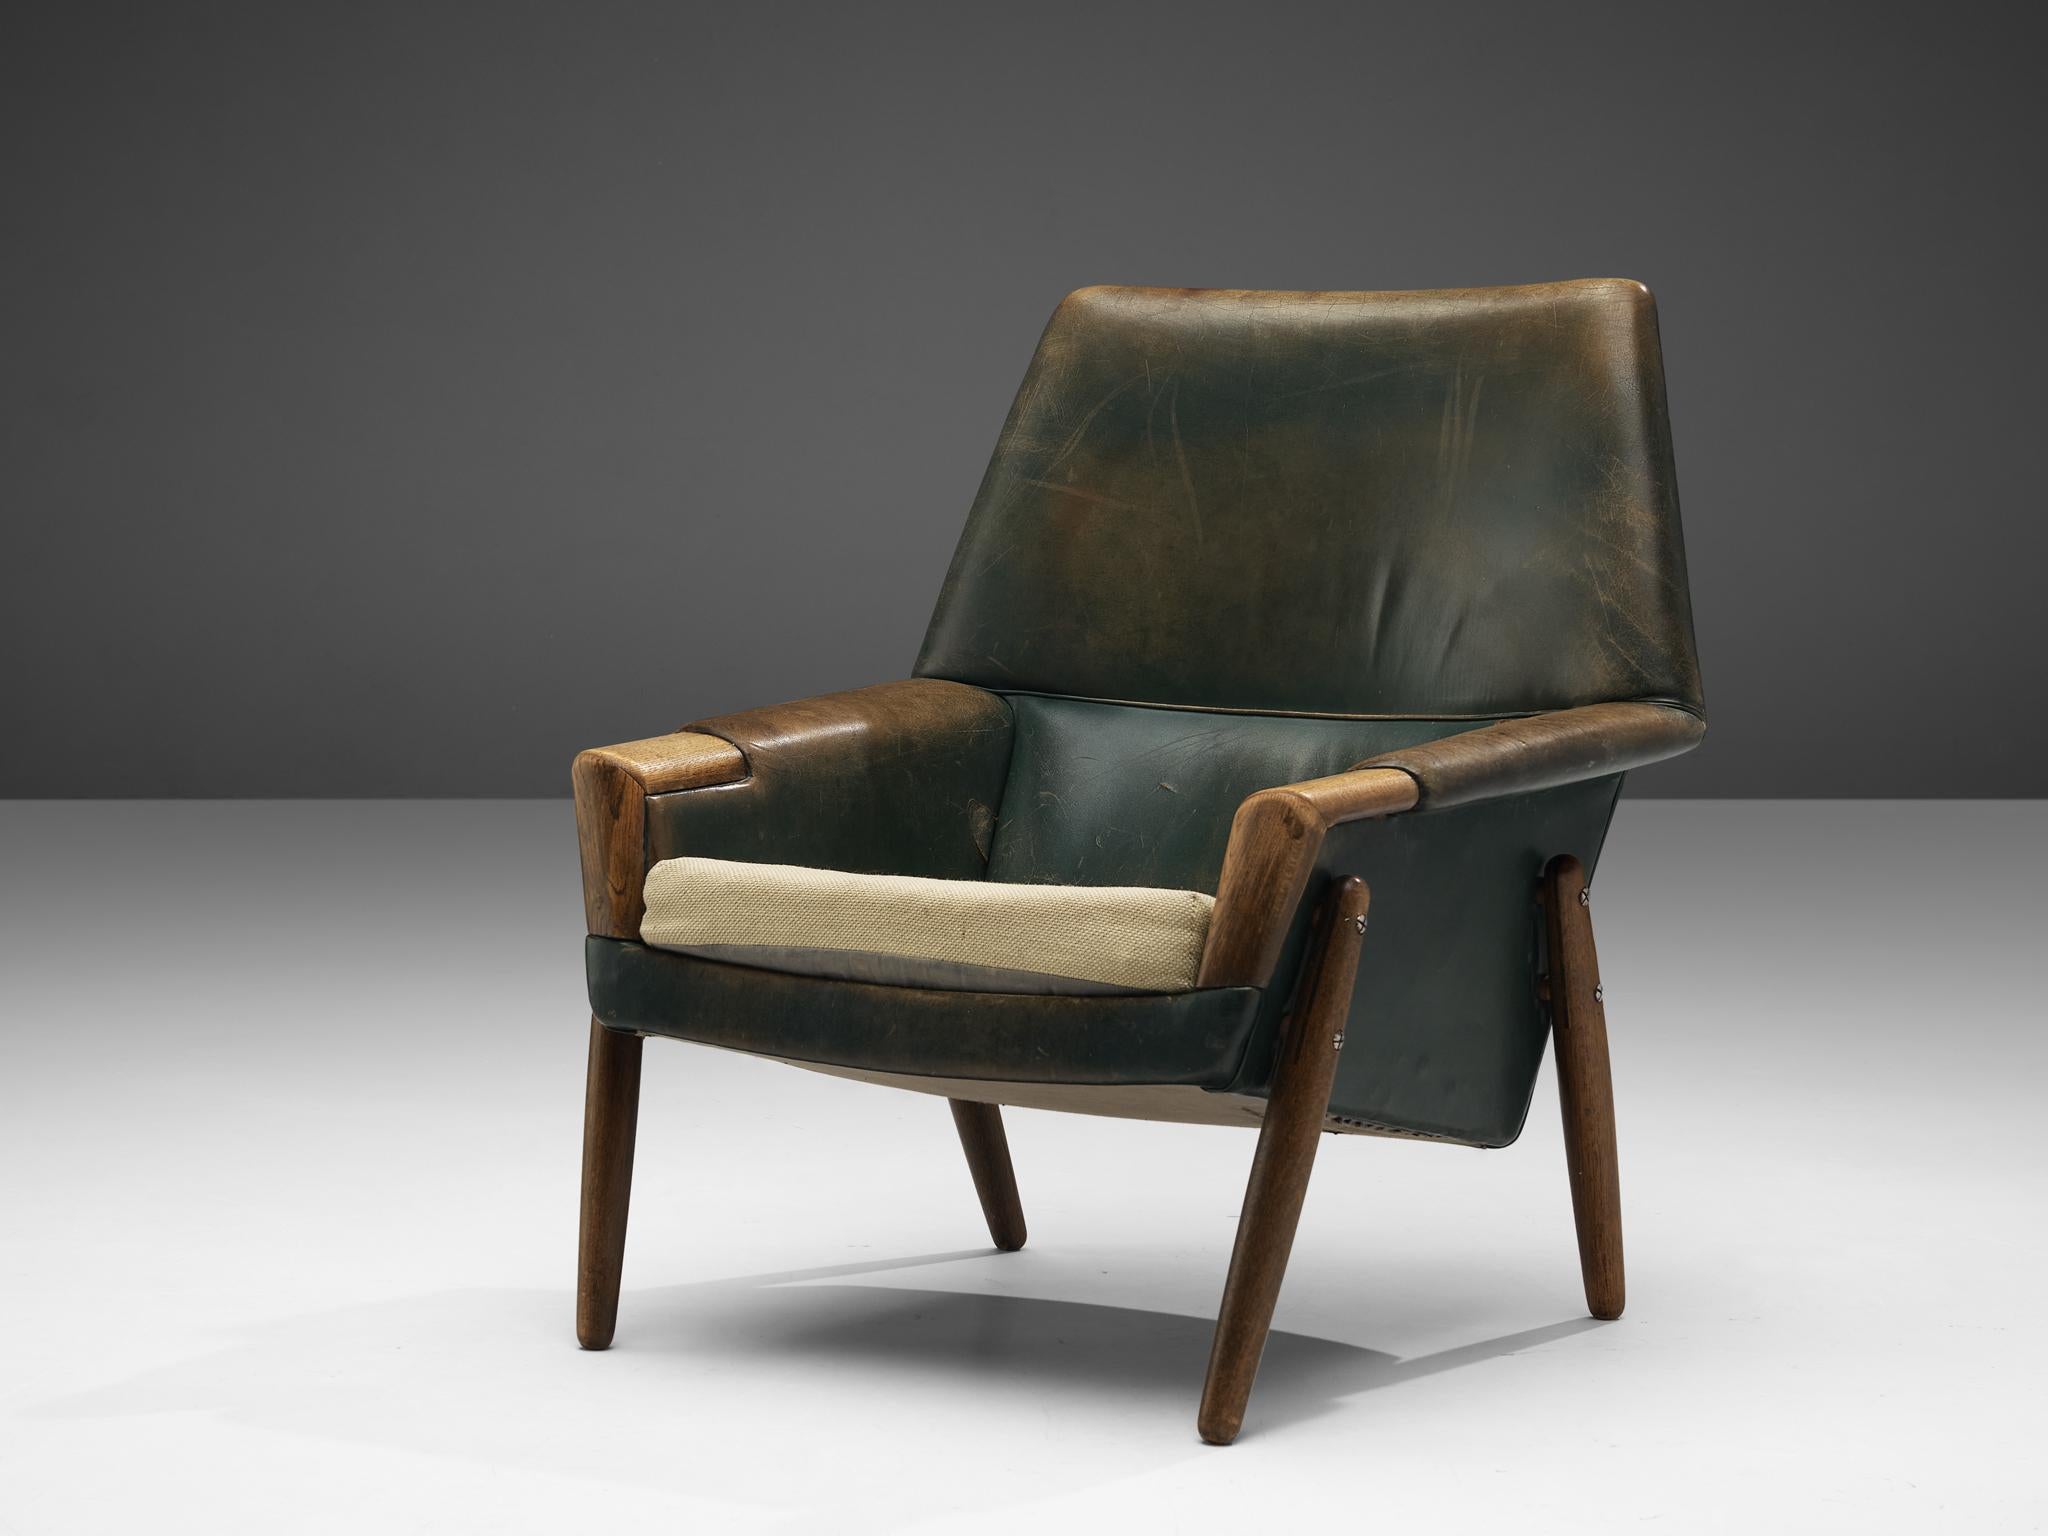 Lounge chair, leather, oak, Denmark, 1960s

Stunning Danish lounge chair with admirable patina. This Danish chair features quintessential design aesthetics. It shows very elegant shapes and real nice details, like the almost perfect shaped